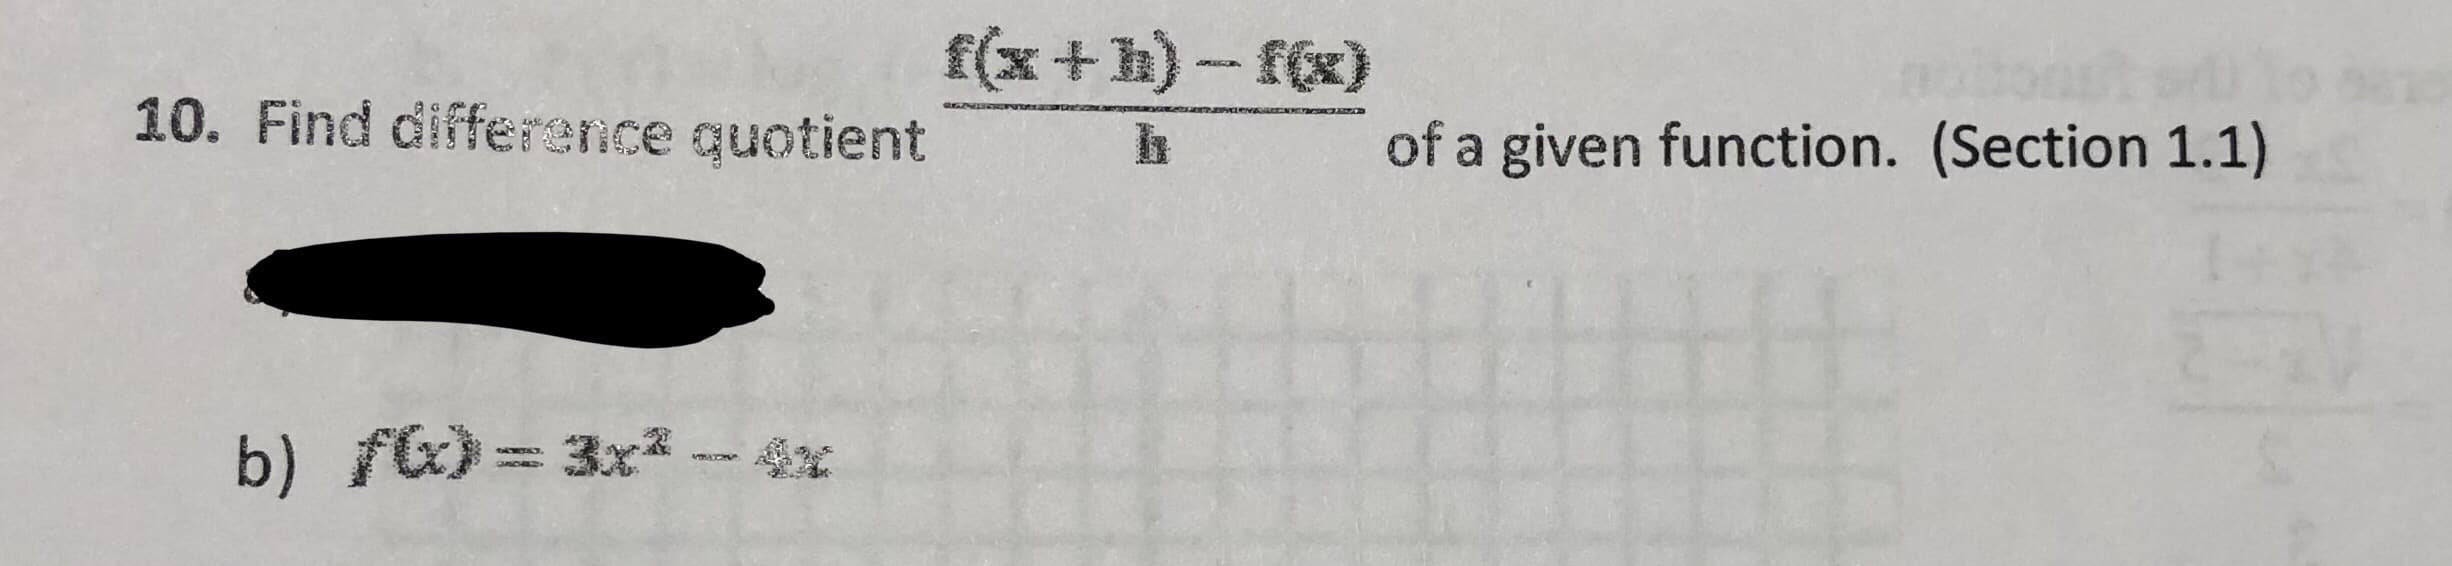 f(x +h) - f(x)
10. Find difference quotient
of a given function. (Section 1.1)
b) fG)= 3x - 4x
